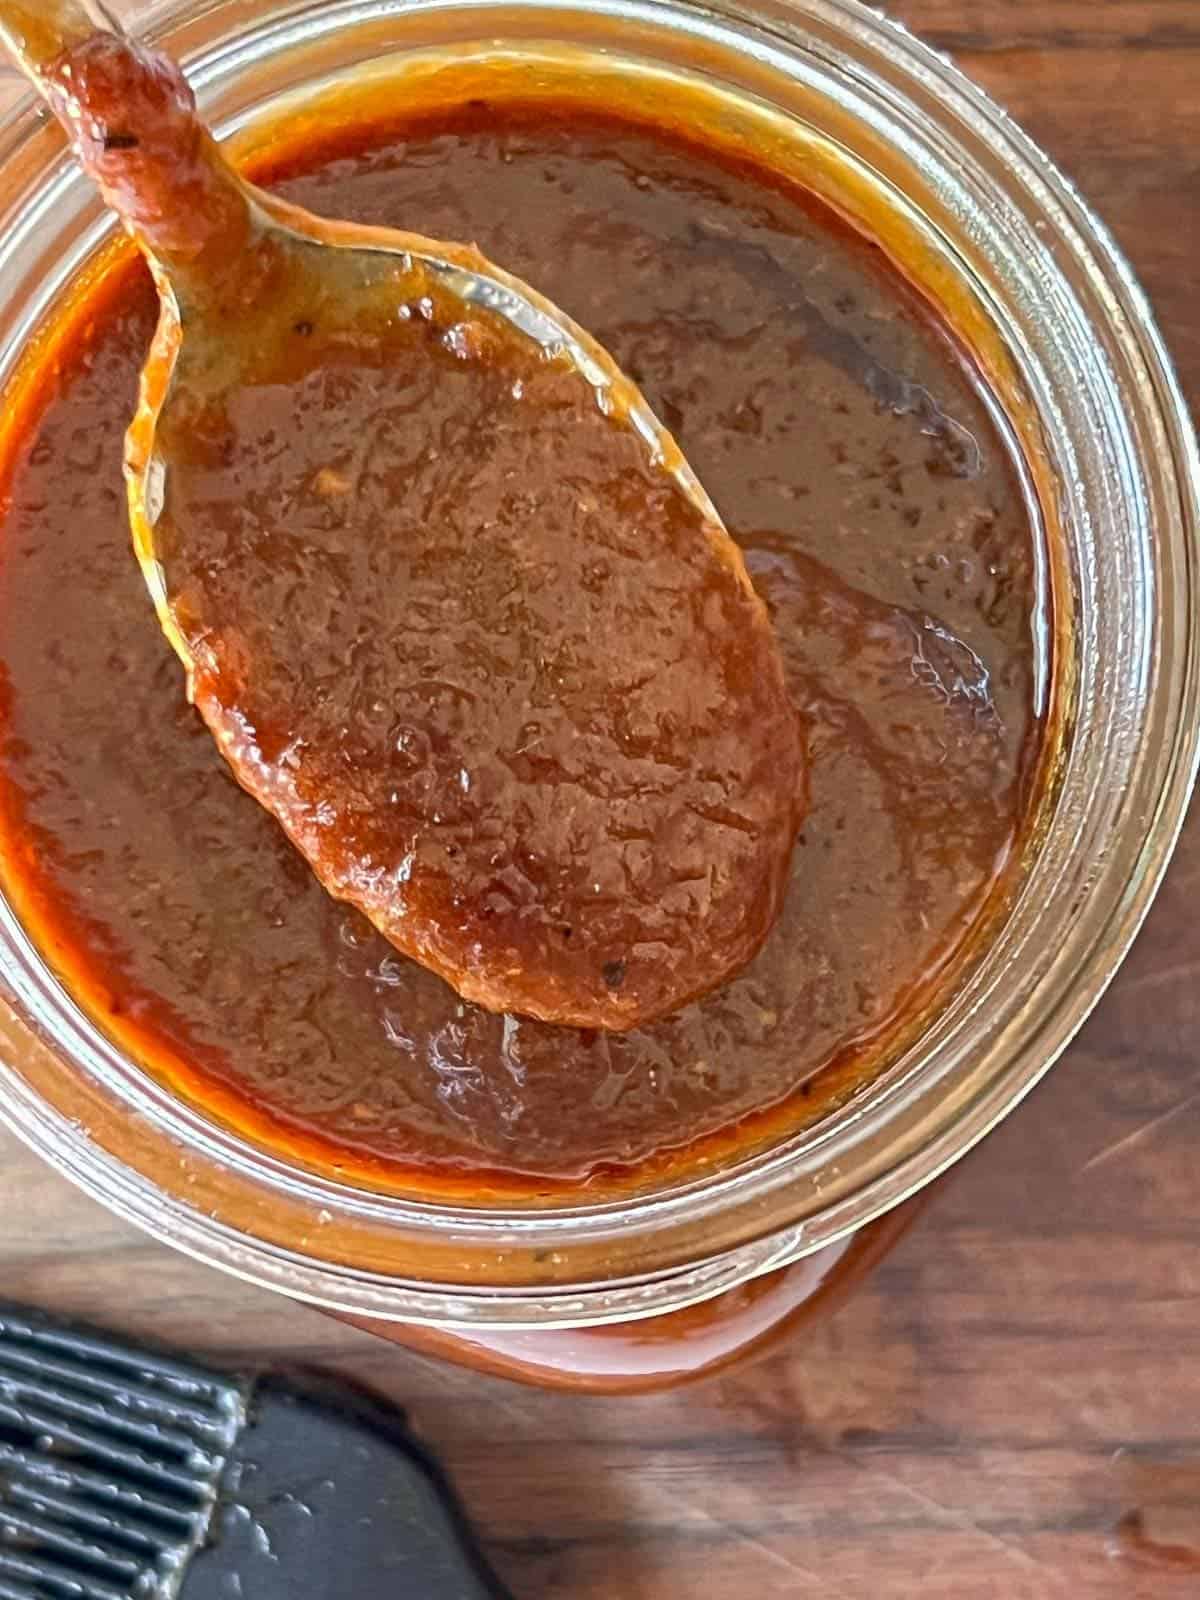 spoonful of bbq sauce showing it's smooth texture